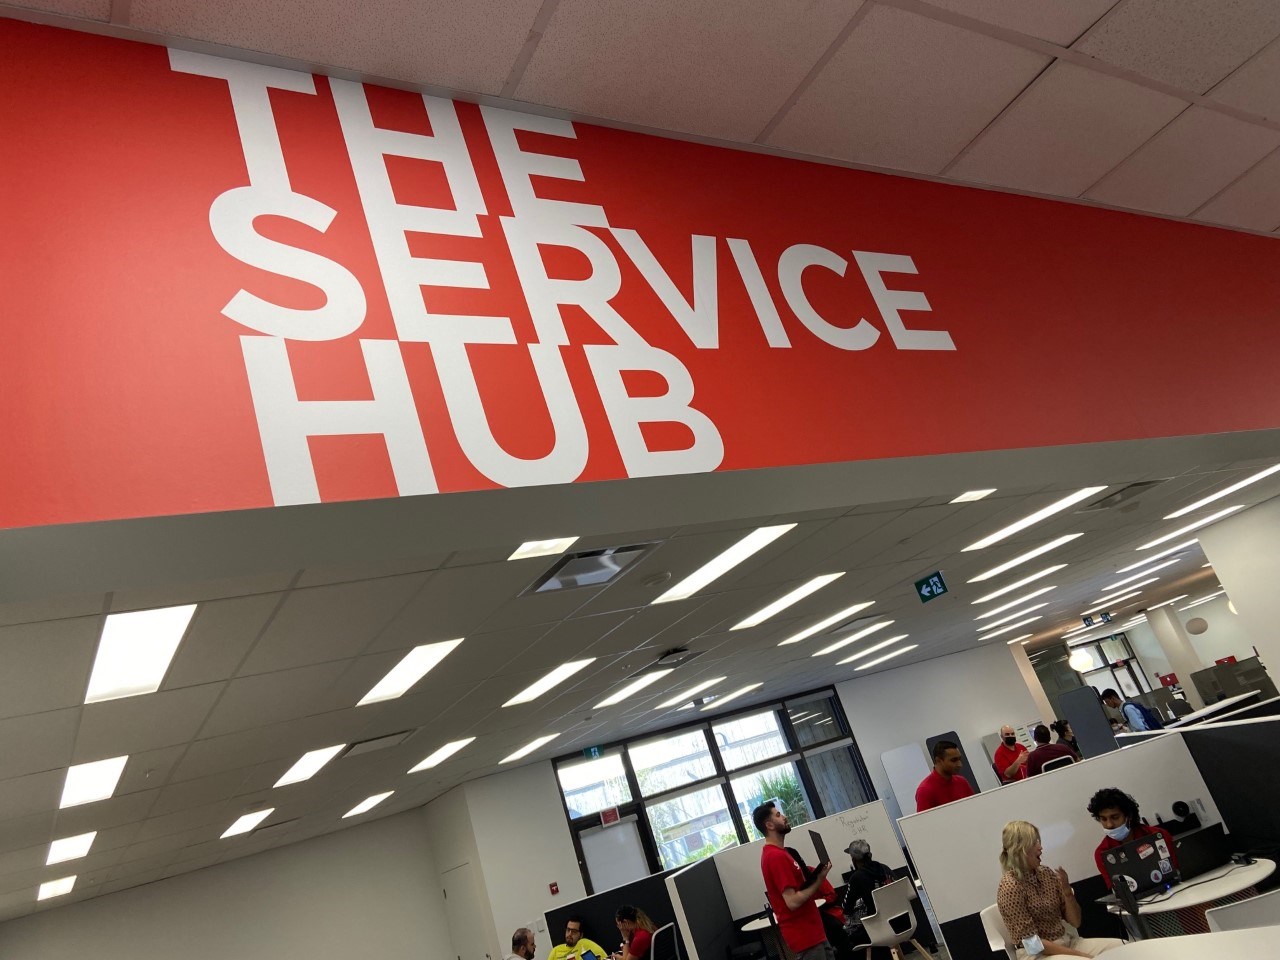 The Service Hub - meeting students where they are, with the help they need